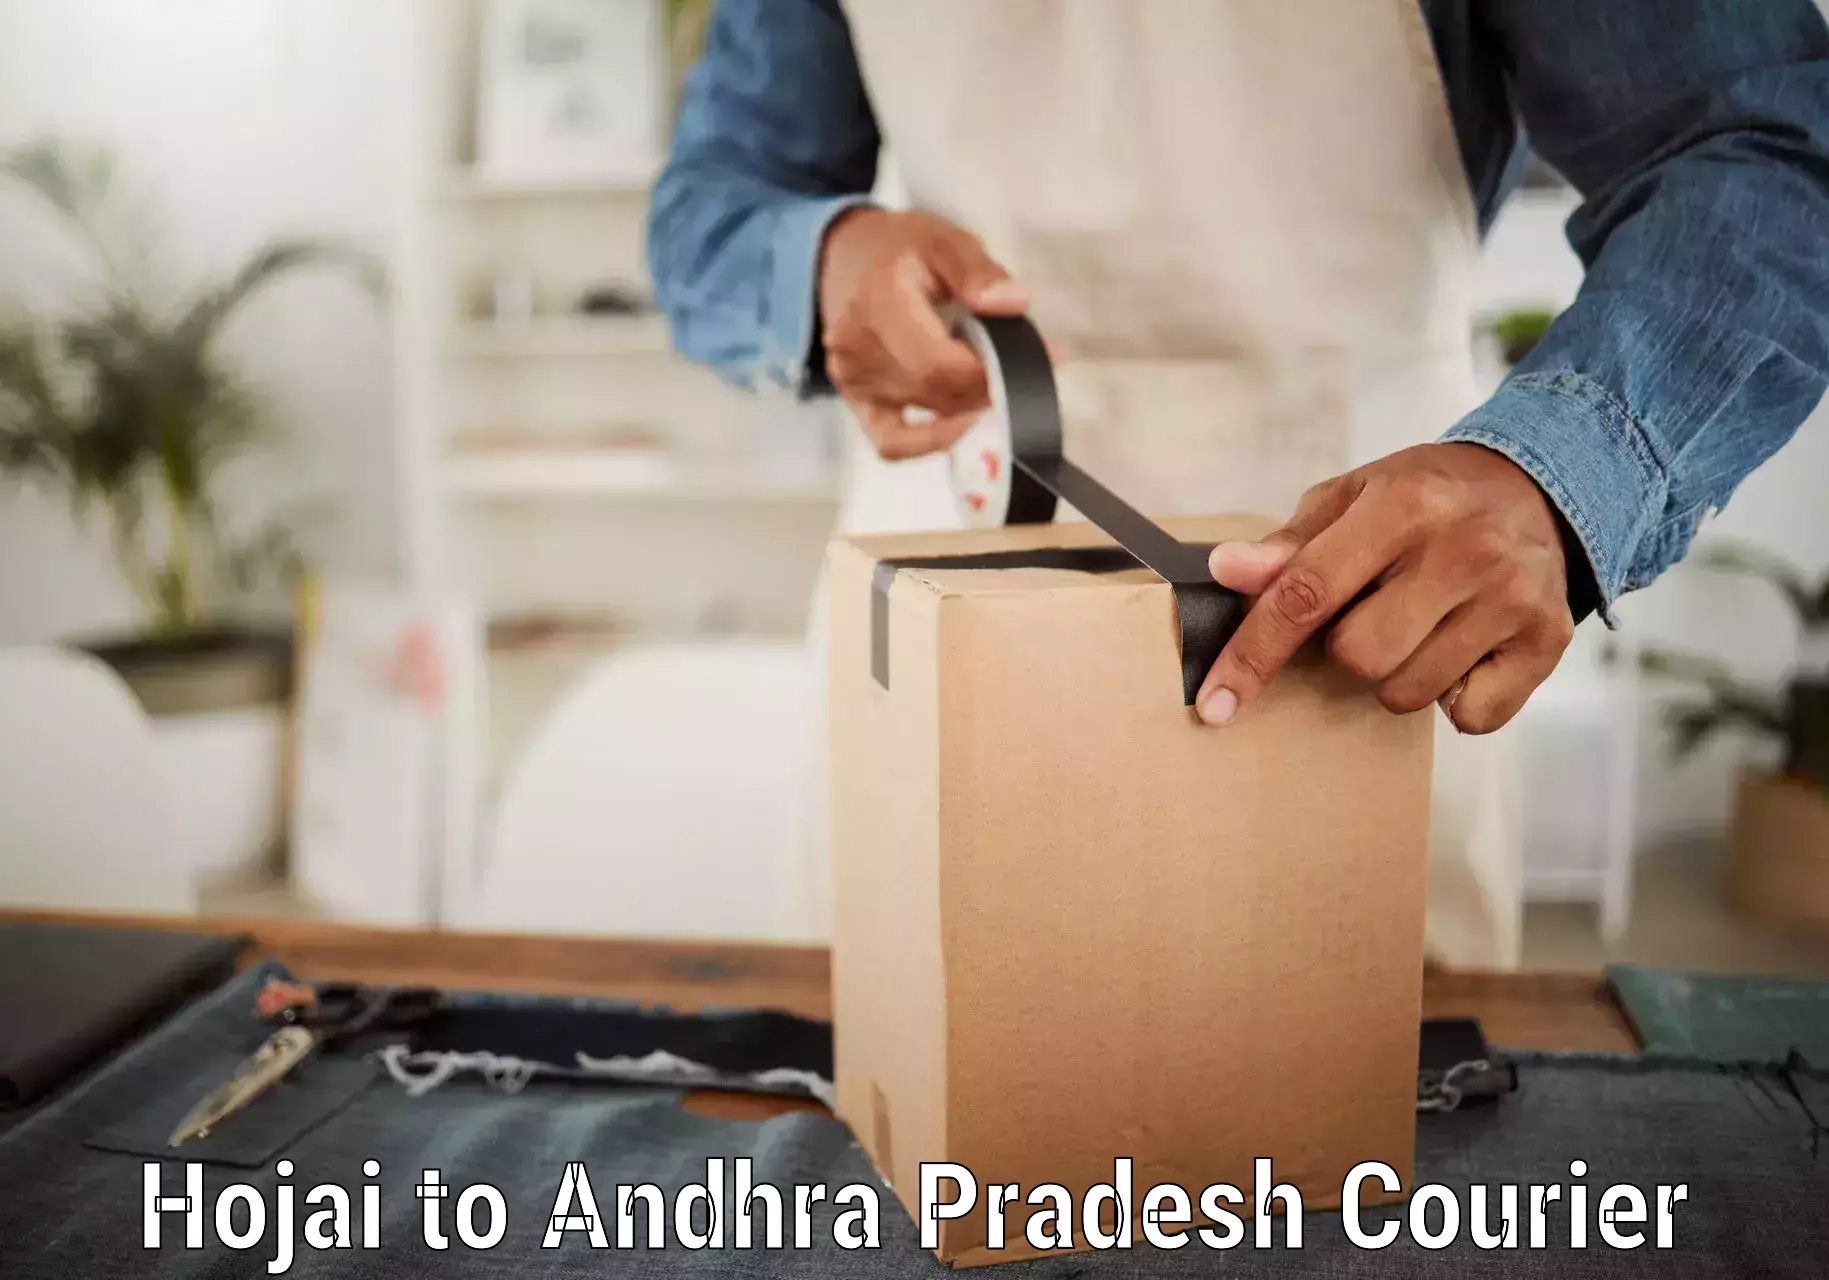 Easy access courier services Hojai to Visakhapatnam